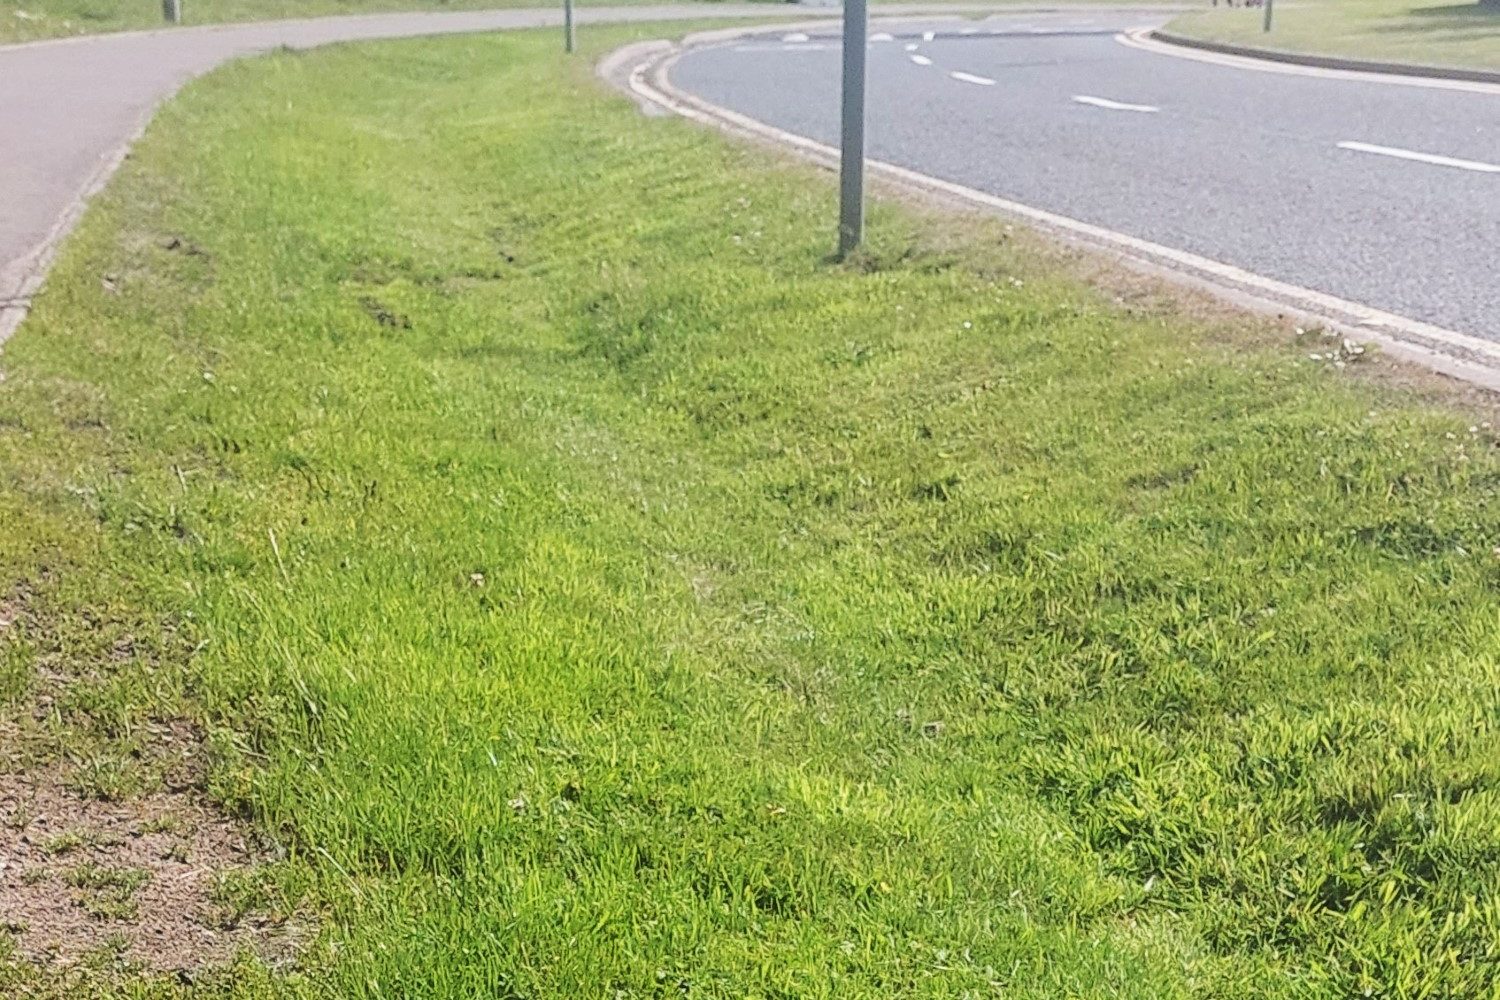 A grassy swale next to a road (a shallow ditch with flat base and sloping sides, designed to catch, store temporarily, and slowly release water).